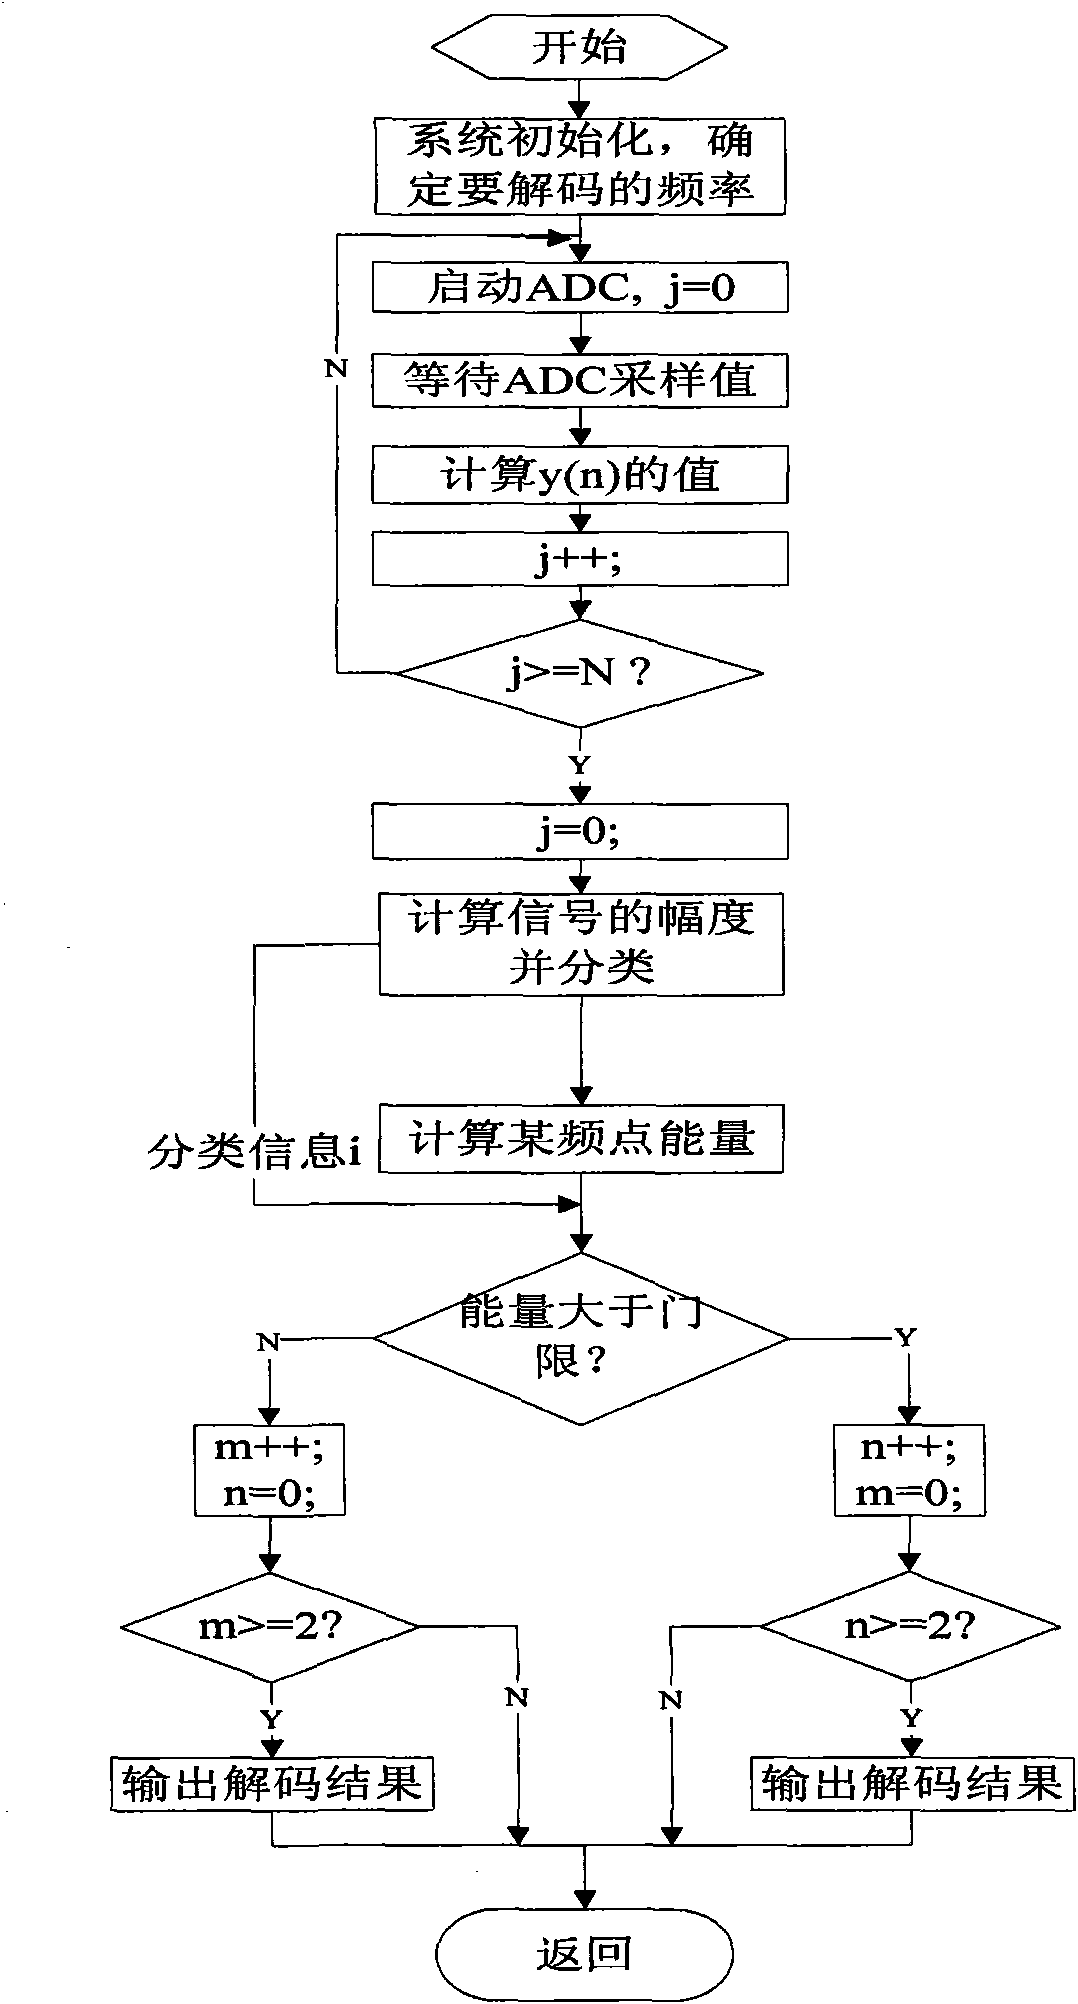 Single audio frequency testing method based on embedded system